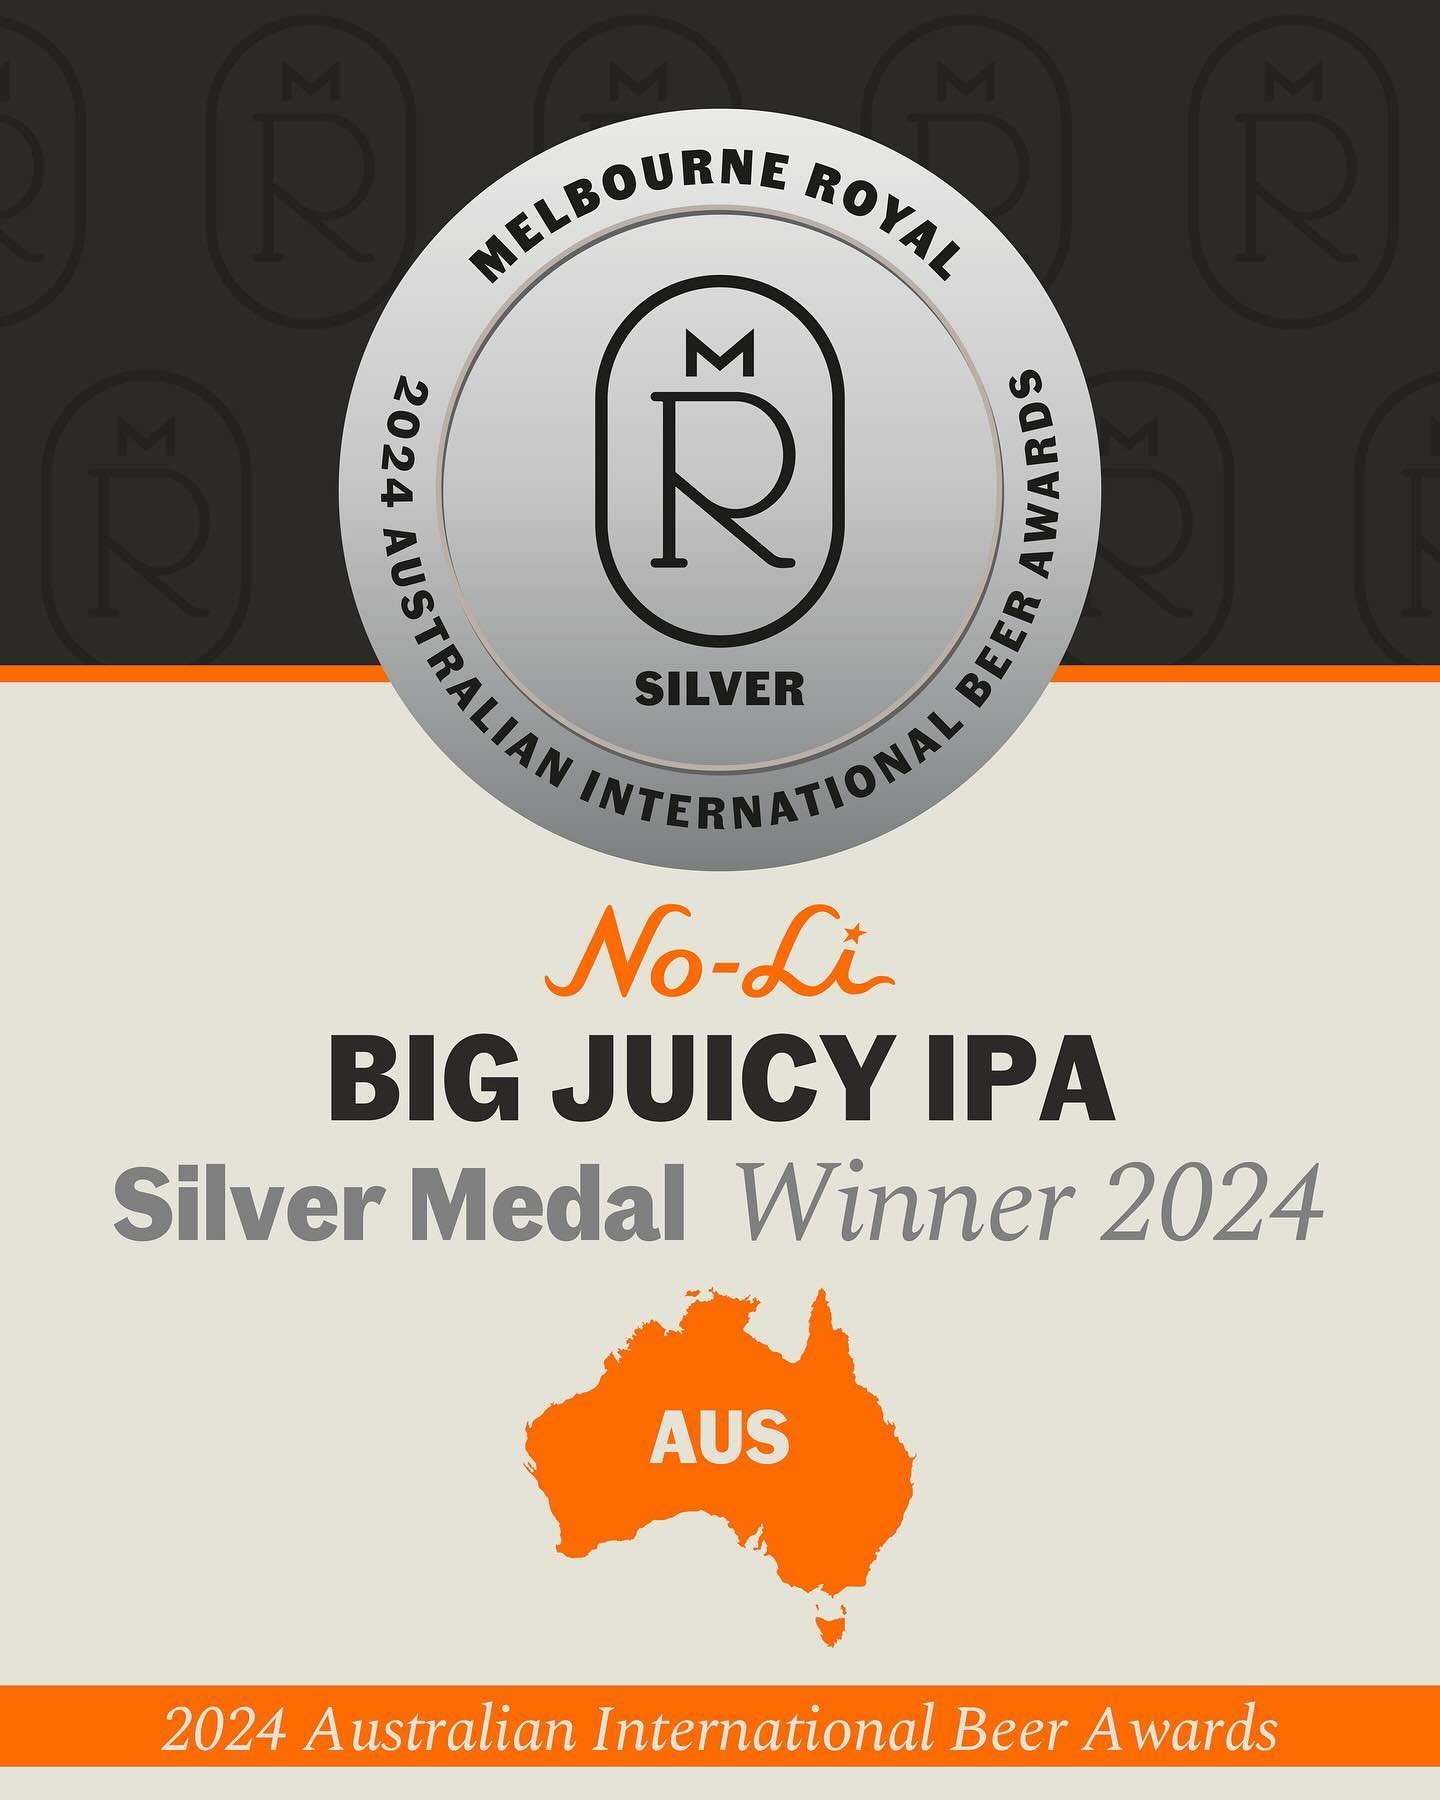 🍊 &lsquo;24 Big Juicy IPA has brought home 3 international brewing awards from around the globe 🌏
&nbsp;
🥈 Australian Int Beer Competition
🥈 New York Int Beer Competition
🥈 Berlin, Germany Int Beer Competition

Swing by the No-Li Beer Campus and